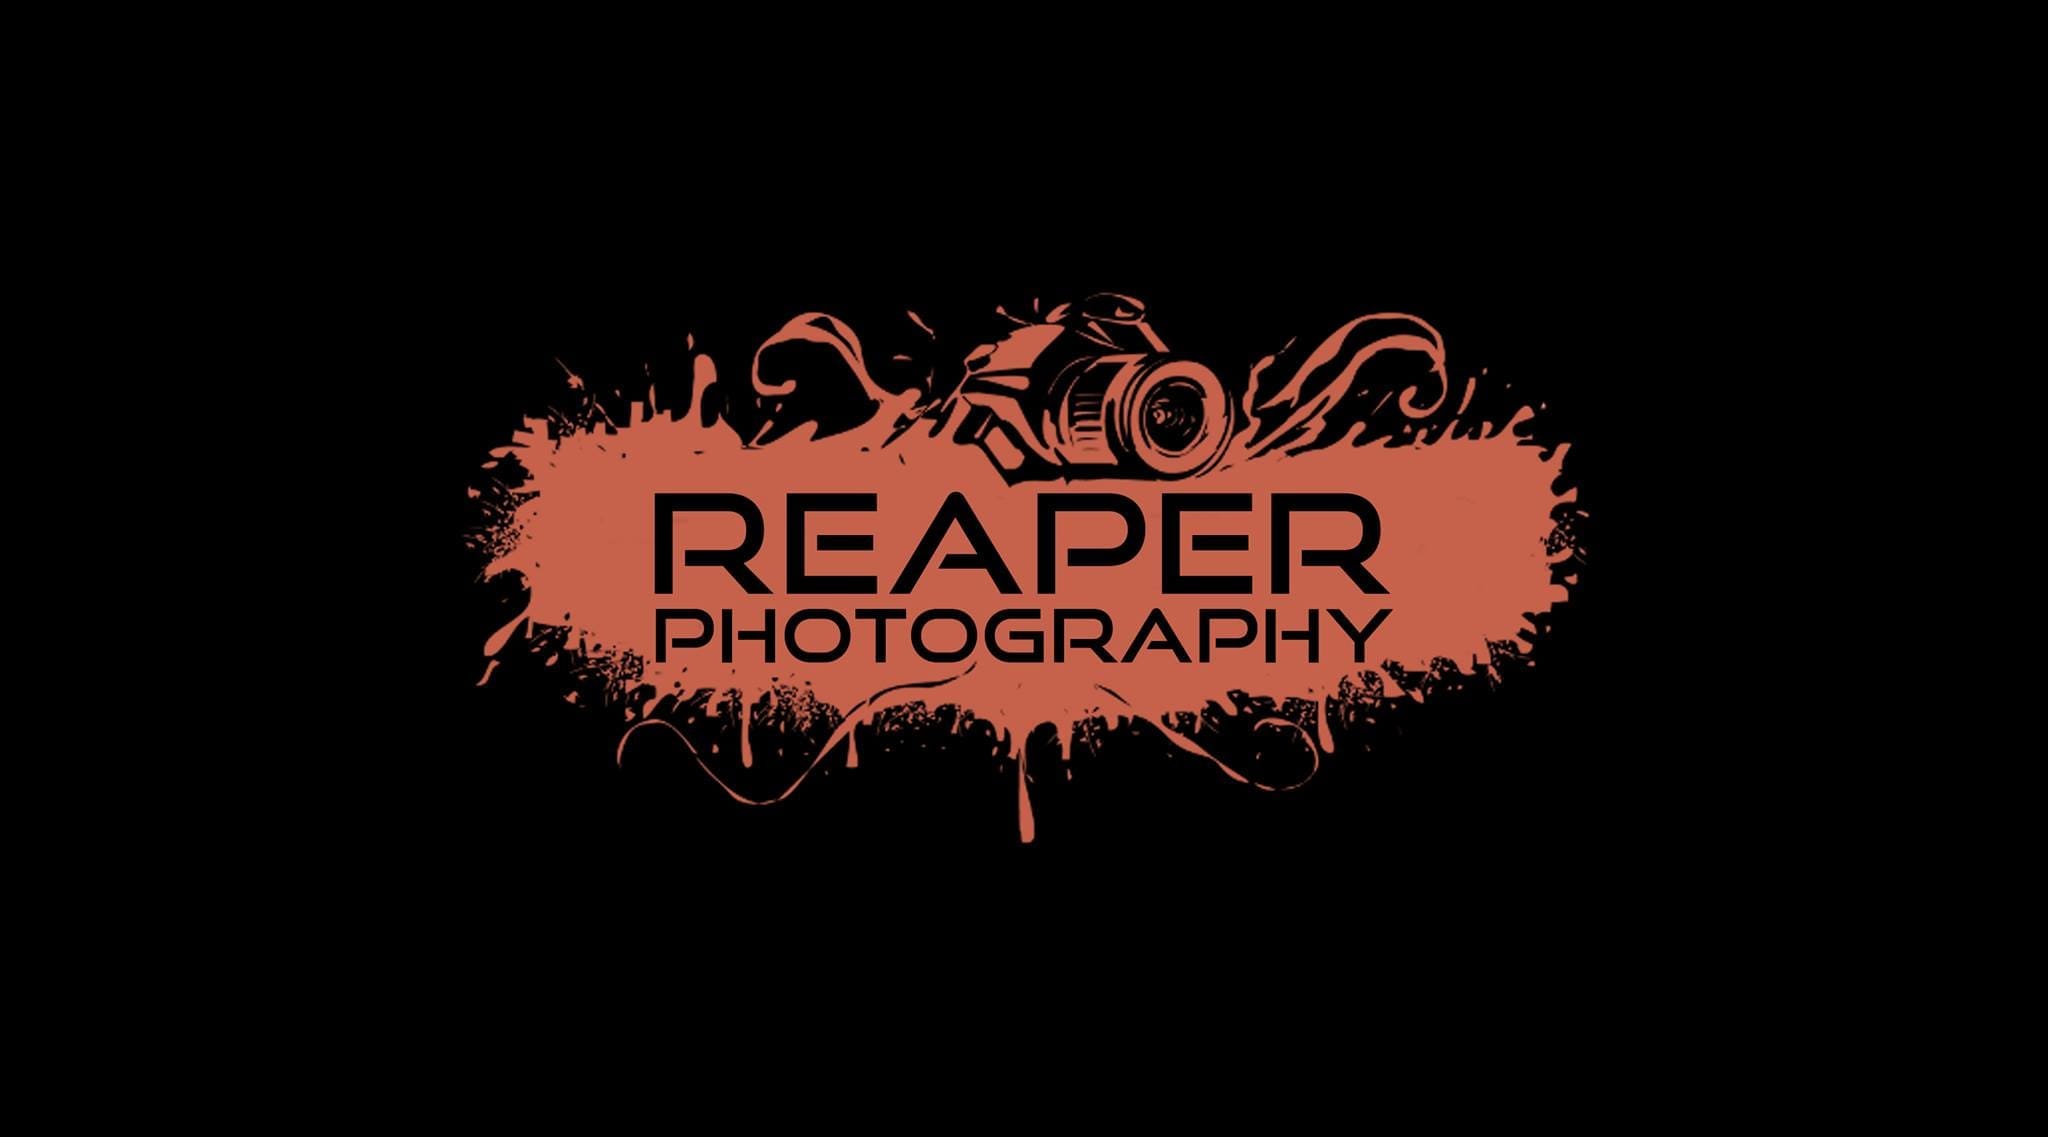 Reaper Photography